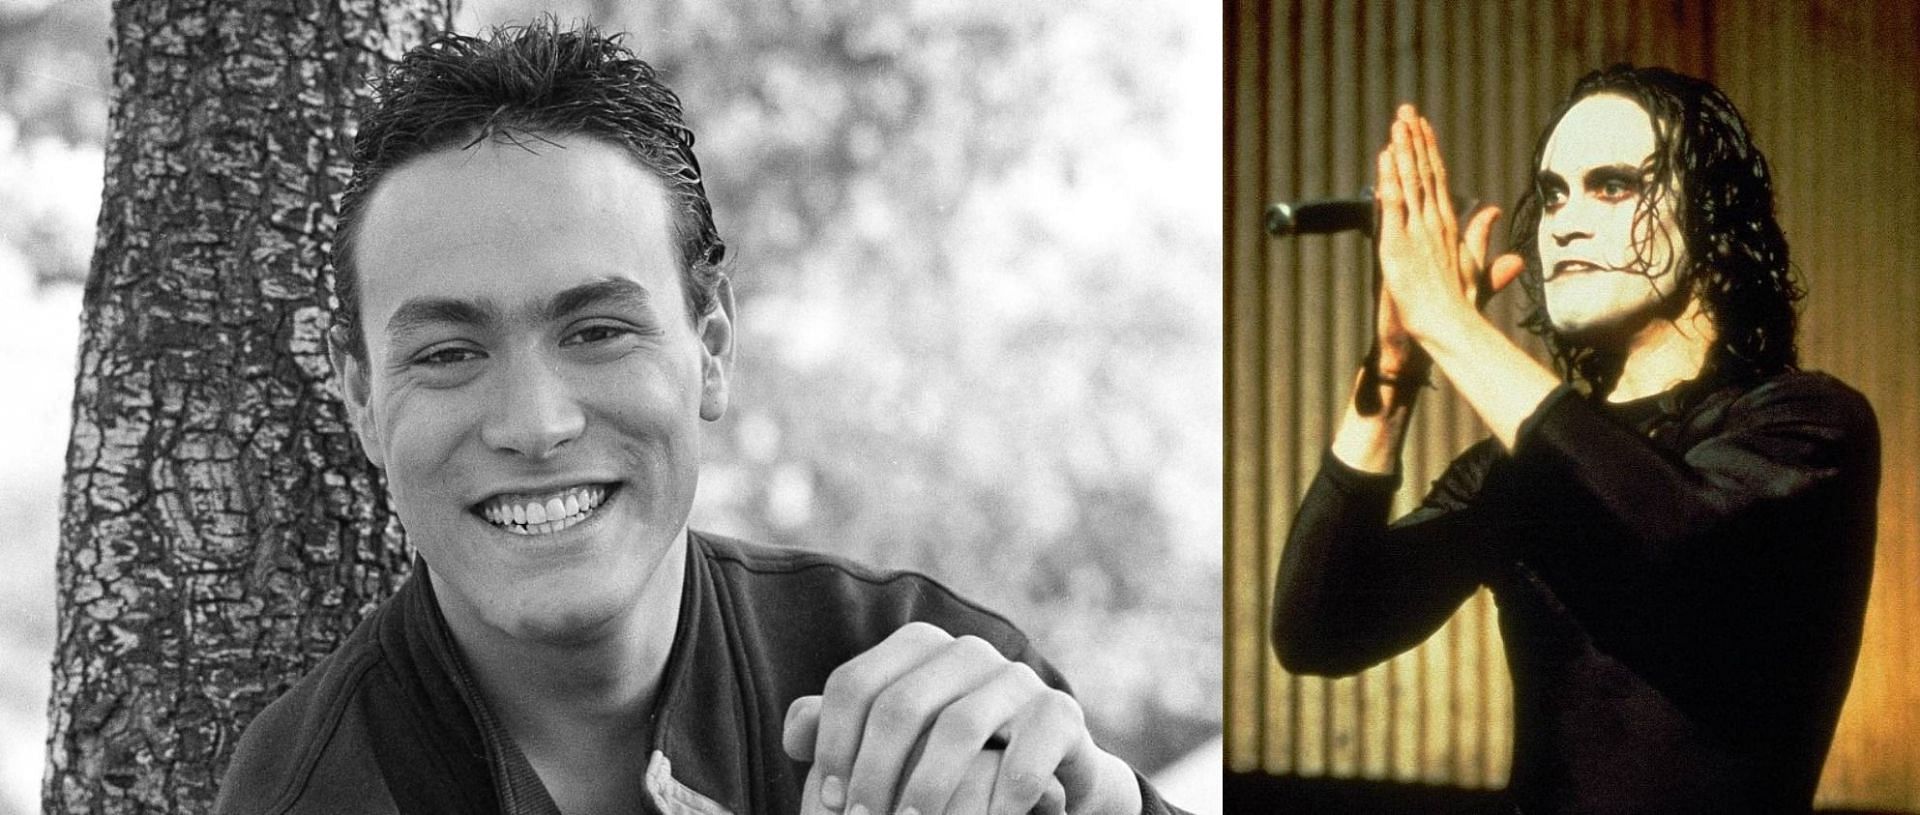 Who shot Brandon Lee on set? Revisiting the tragic death of Bruce Lee's son  in the wake of Alec Baldwin's incident